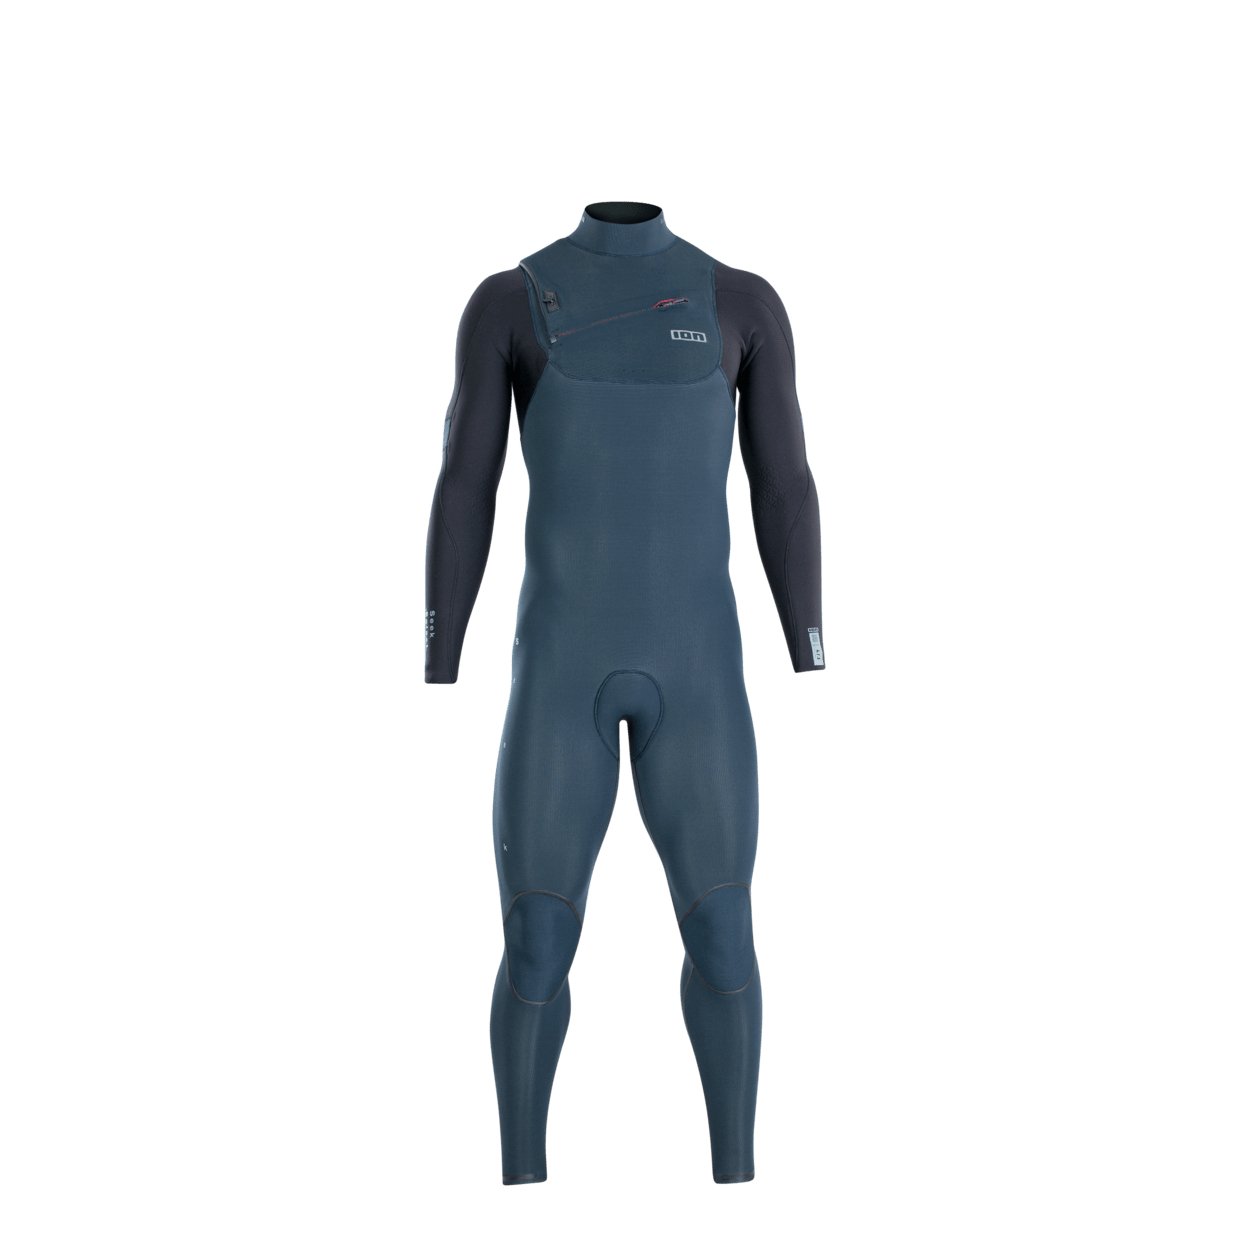 ION Seek Select 5/4 Front Zip 2022 - Worthing Watersports - 9010583055510 - Wetsuits - ION Water